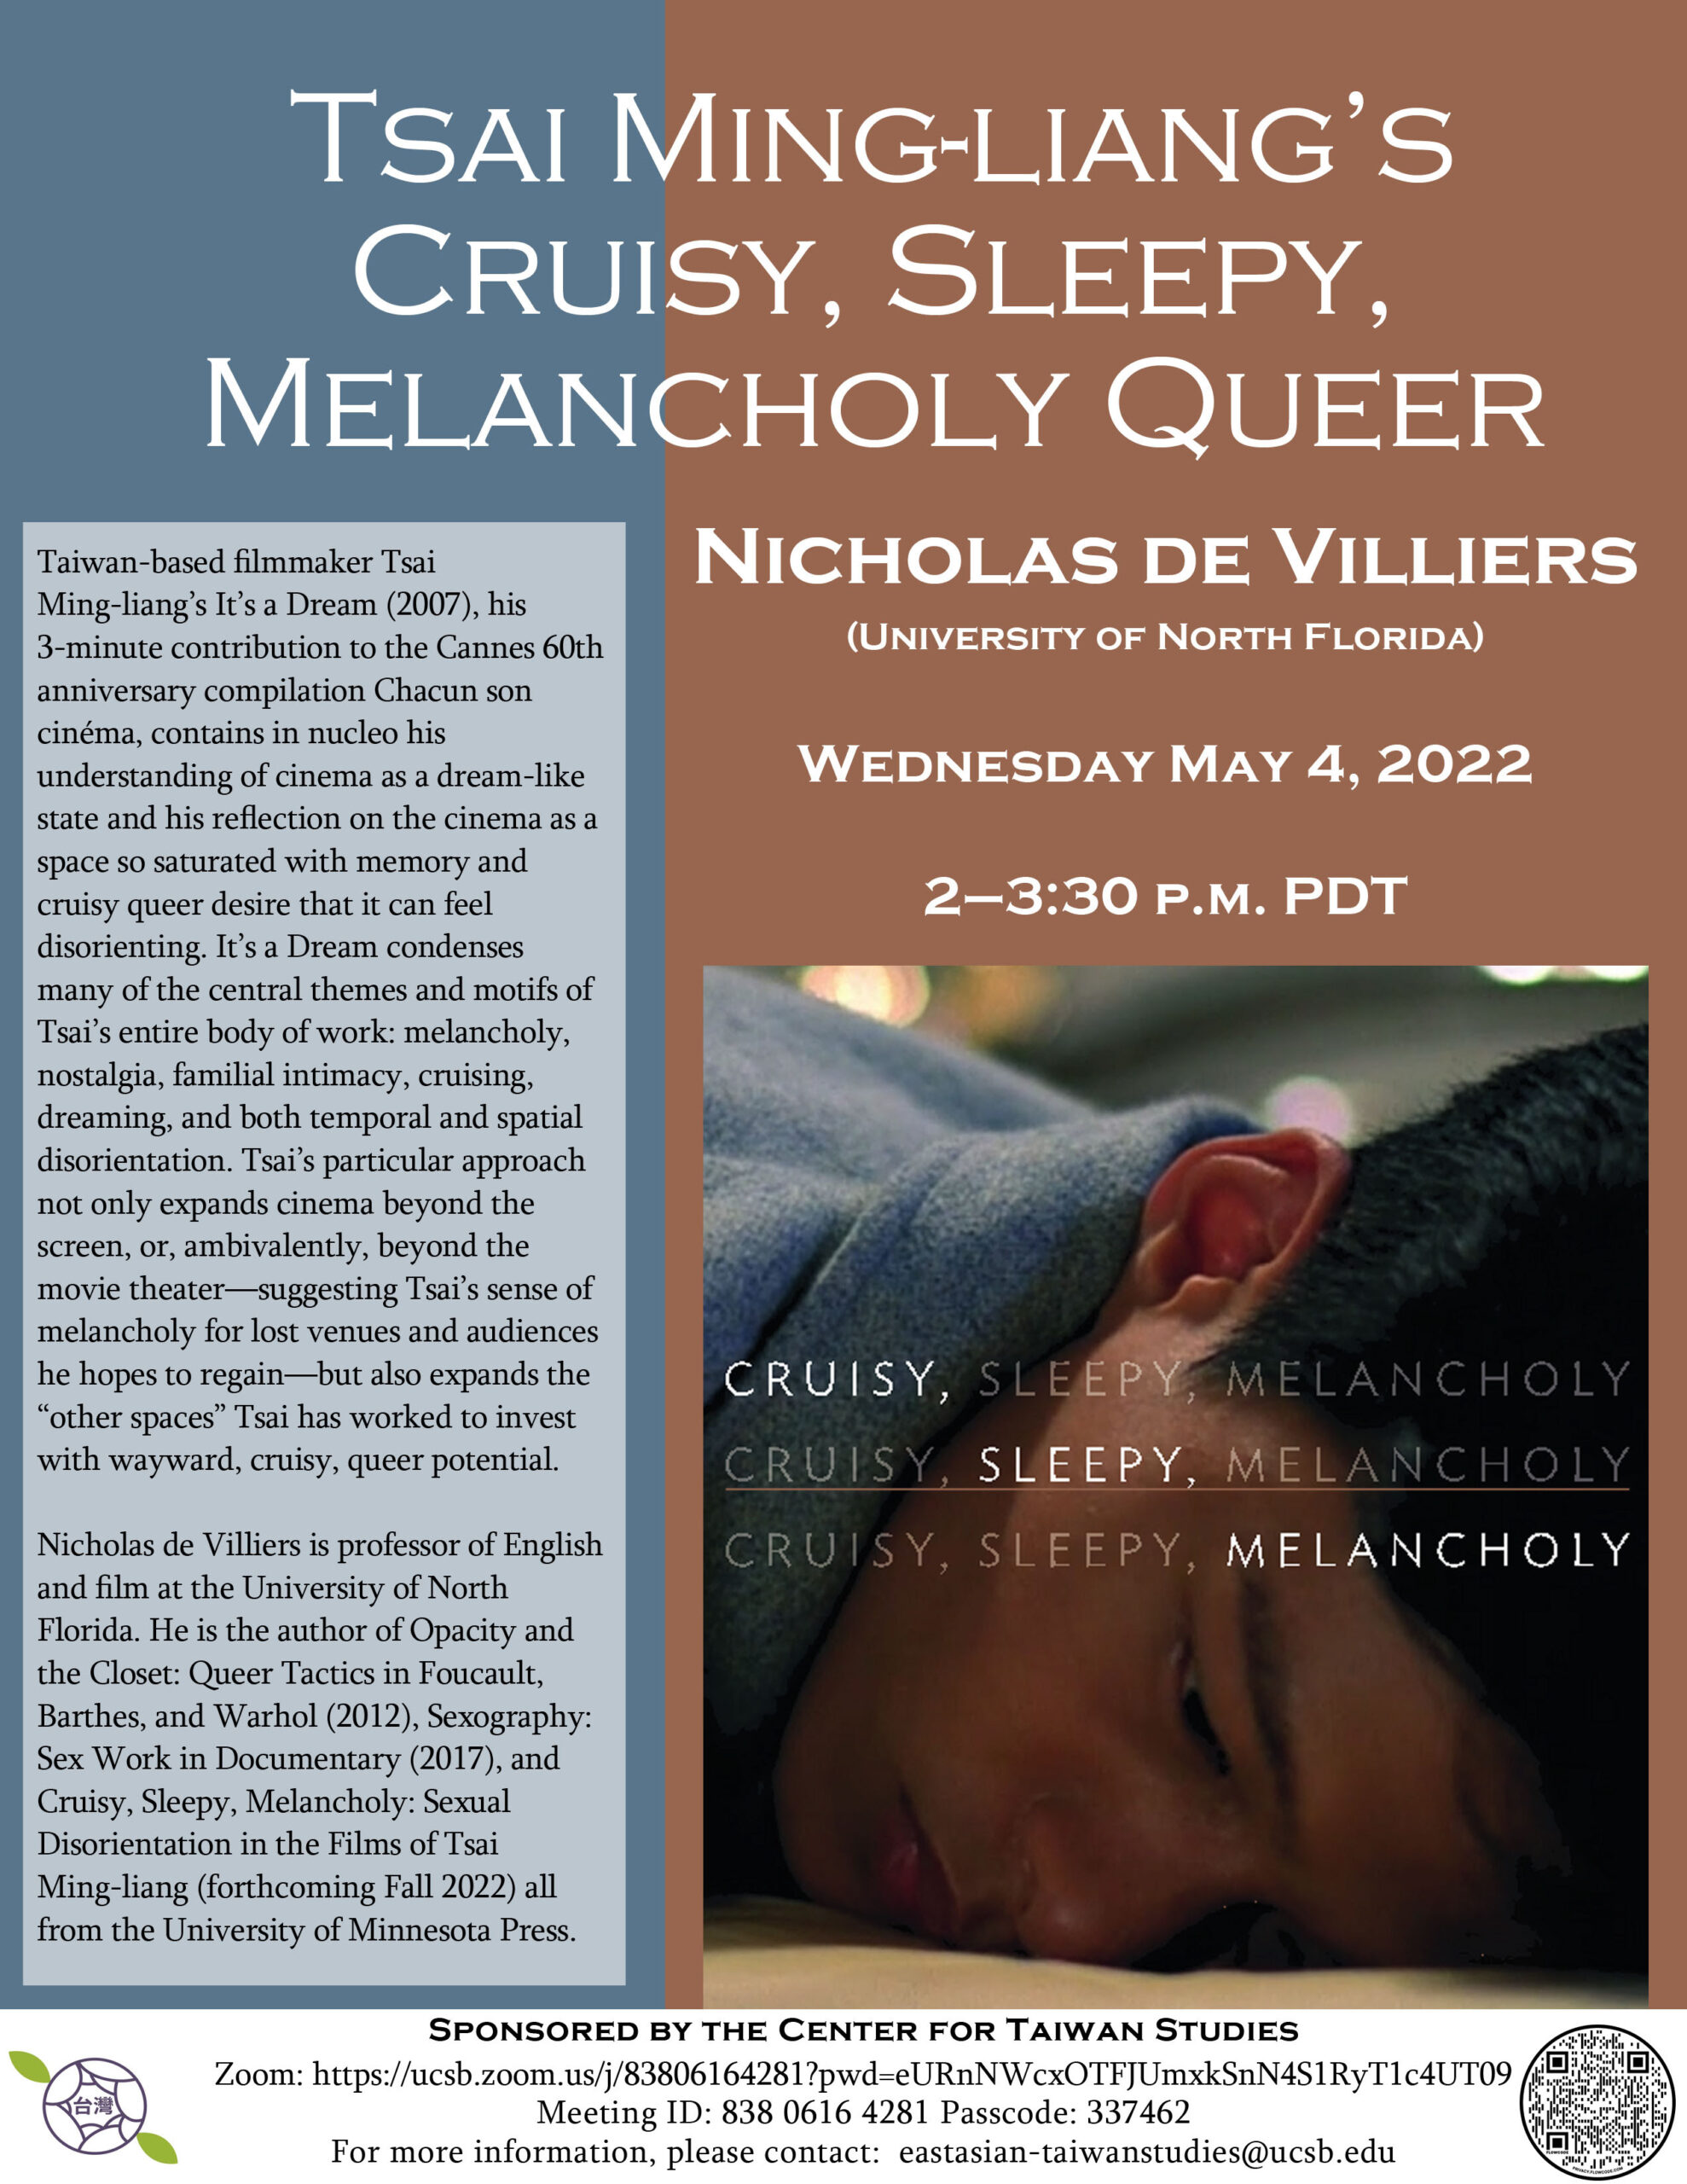 Flyer for "Tsai Ming-Liang's Cruisy, Sleepy, Melancholy Queer" with Nicholas de Villiers on May 4, 2022 from 2-3:30PM on Zoom